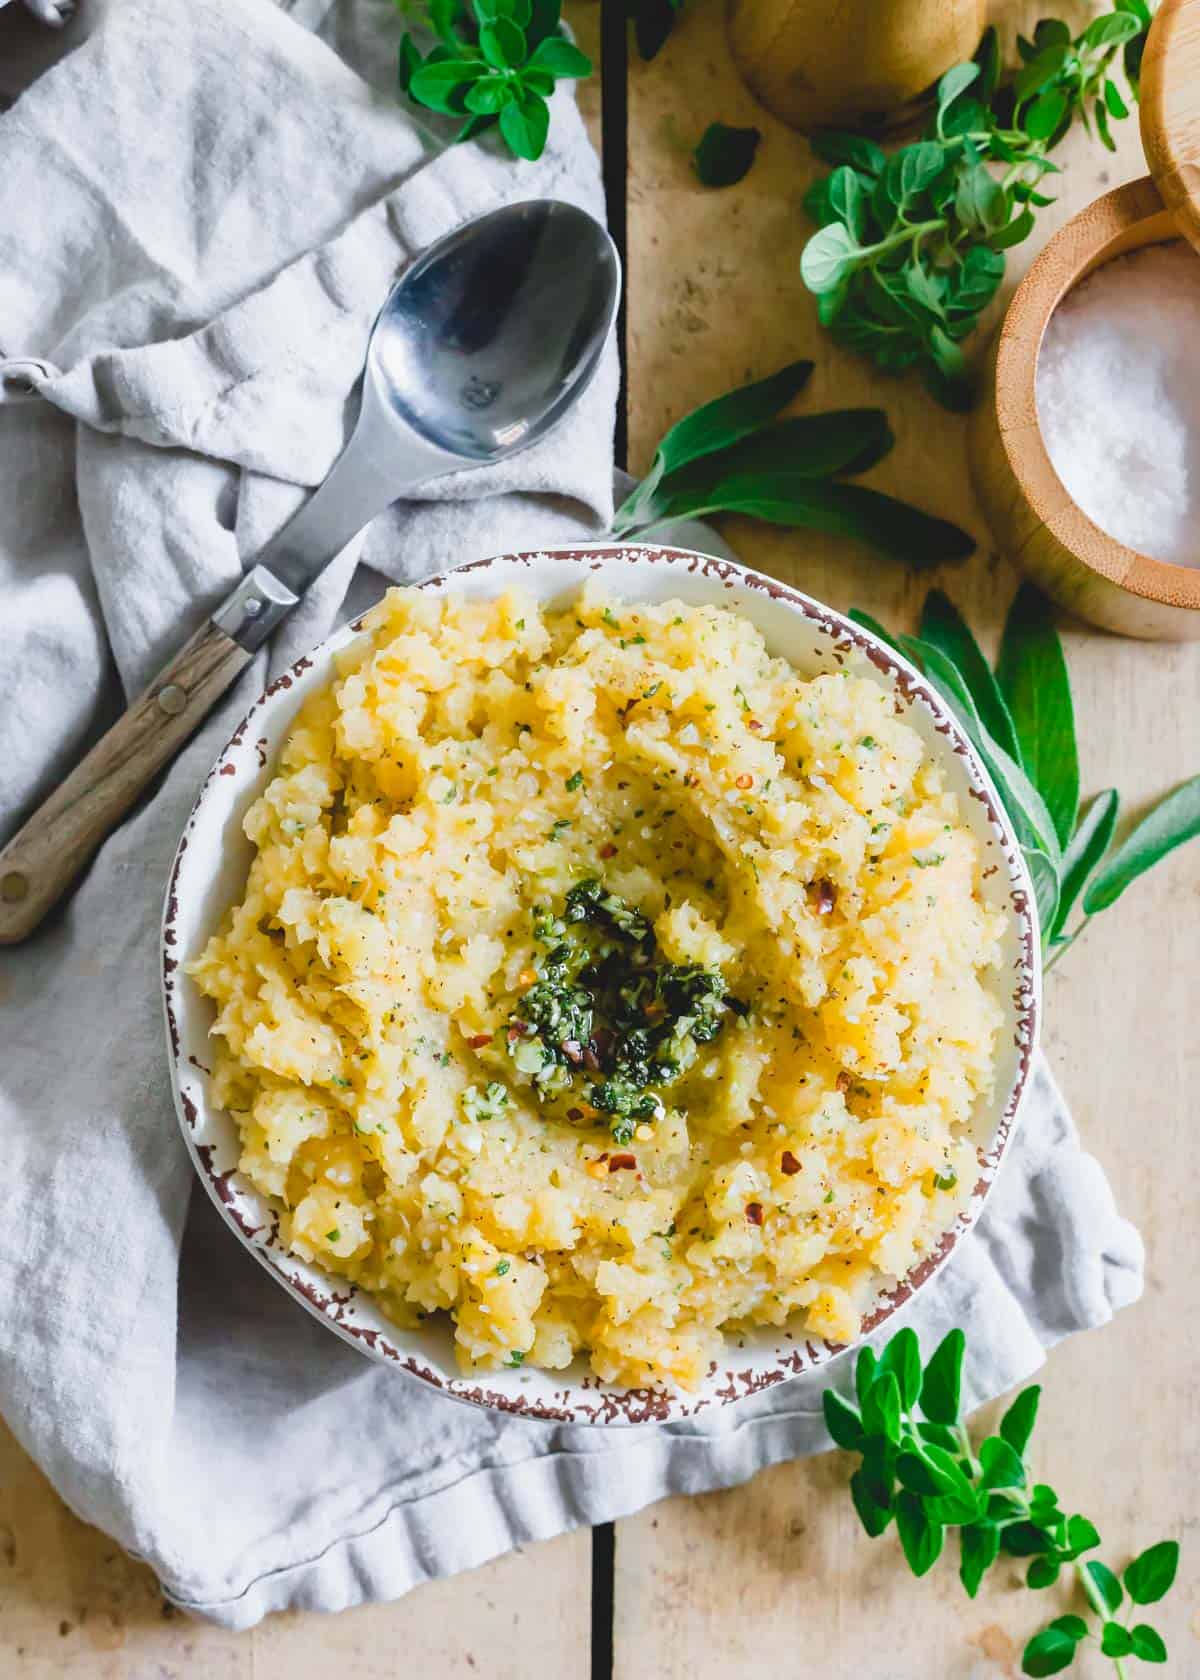 Mashed rutabaga with garlic herb butter in a serving bowl.